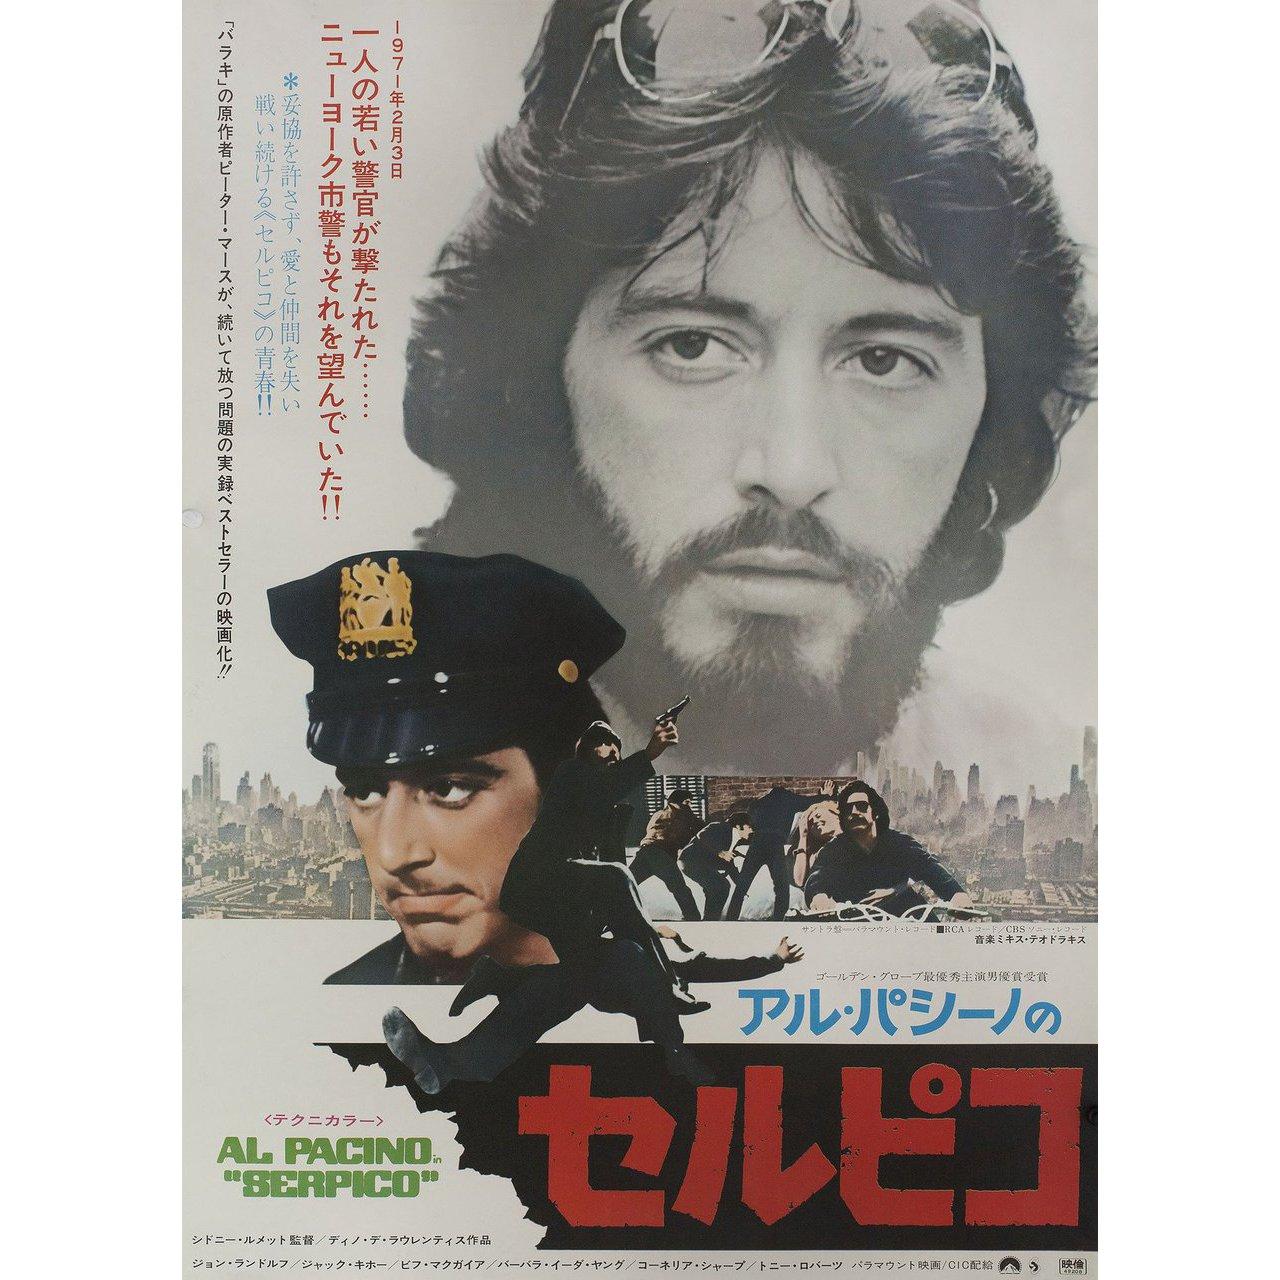 Original 1974 Japanese B2 poster for the film “Serpico” directed by Sidney Lumet with Al Pacino / John Randolph / Jack Kehoe / Biff McGuire. Very good-fine condition, folded. Many original posters were issued folded or were subsequently folded.